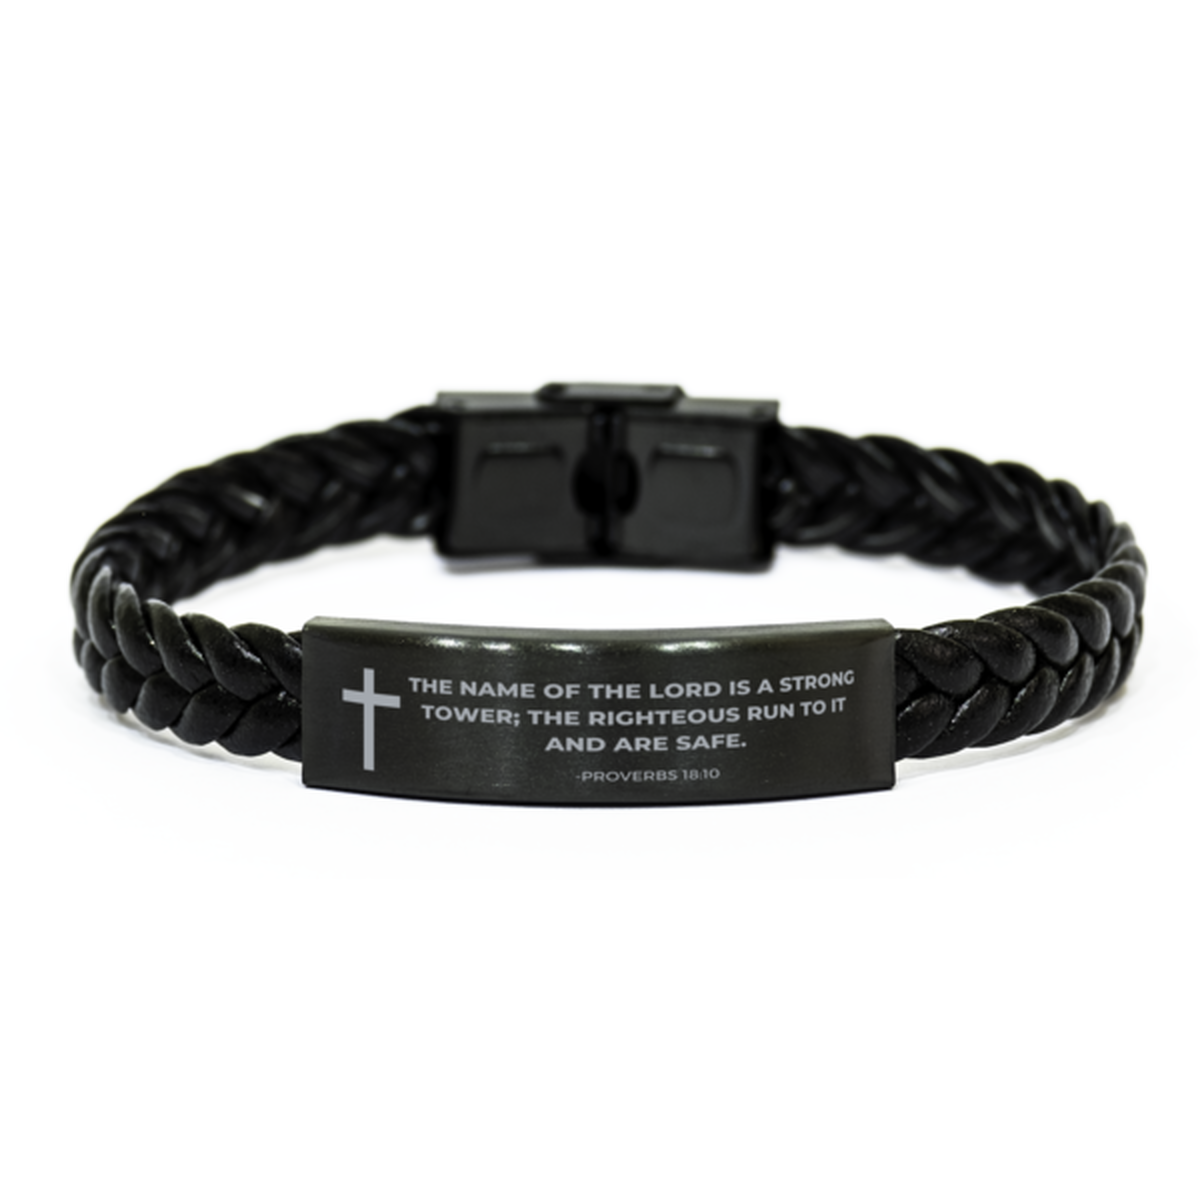 Baptism Gifts For Teenage Boys Girls, Christian Bible Verse Braided Leather Bracelet, The name of the Lord is a strong, Catholic Confirmation Gifts for Son, Godson, Grandson, Nephew